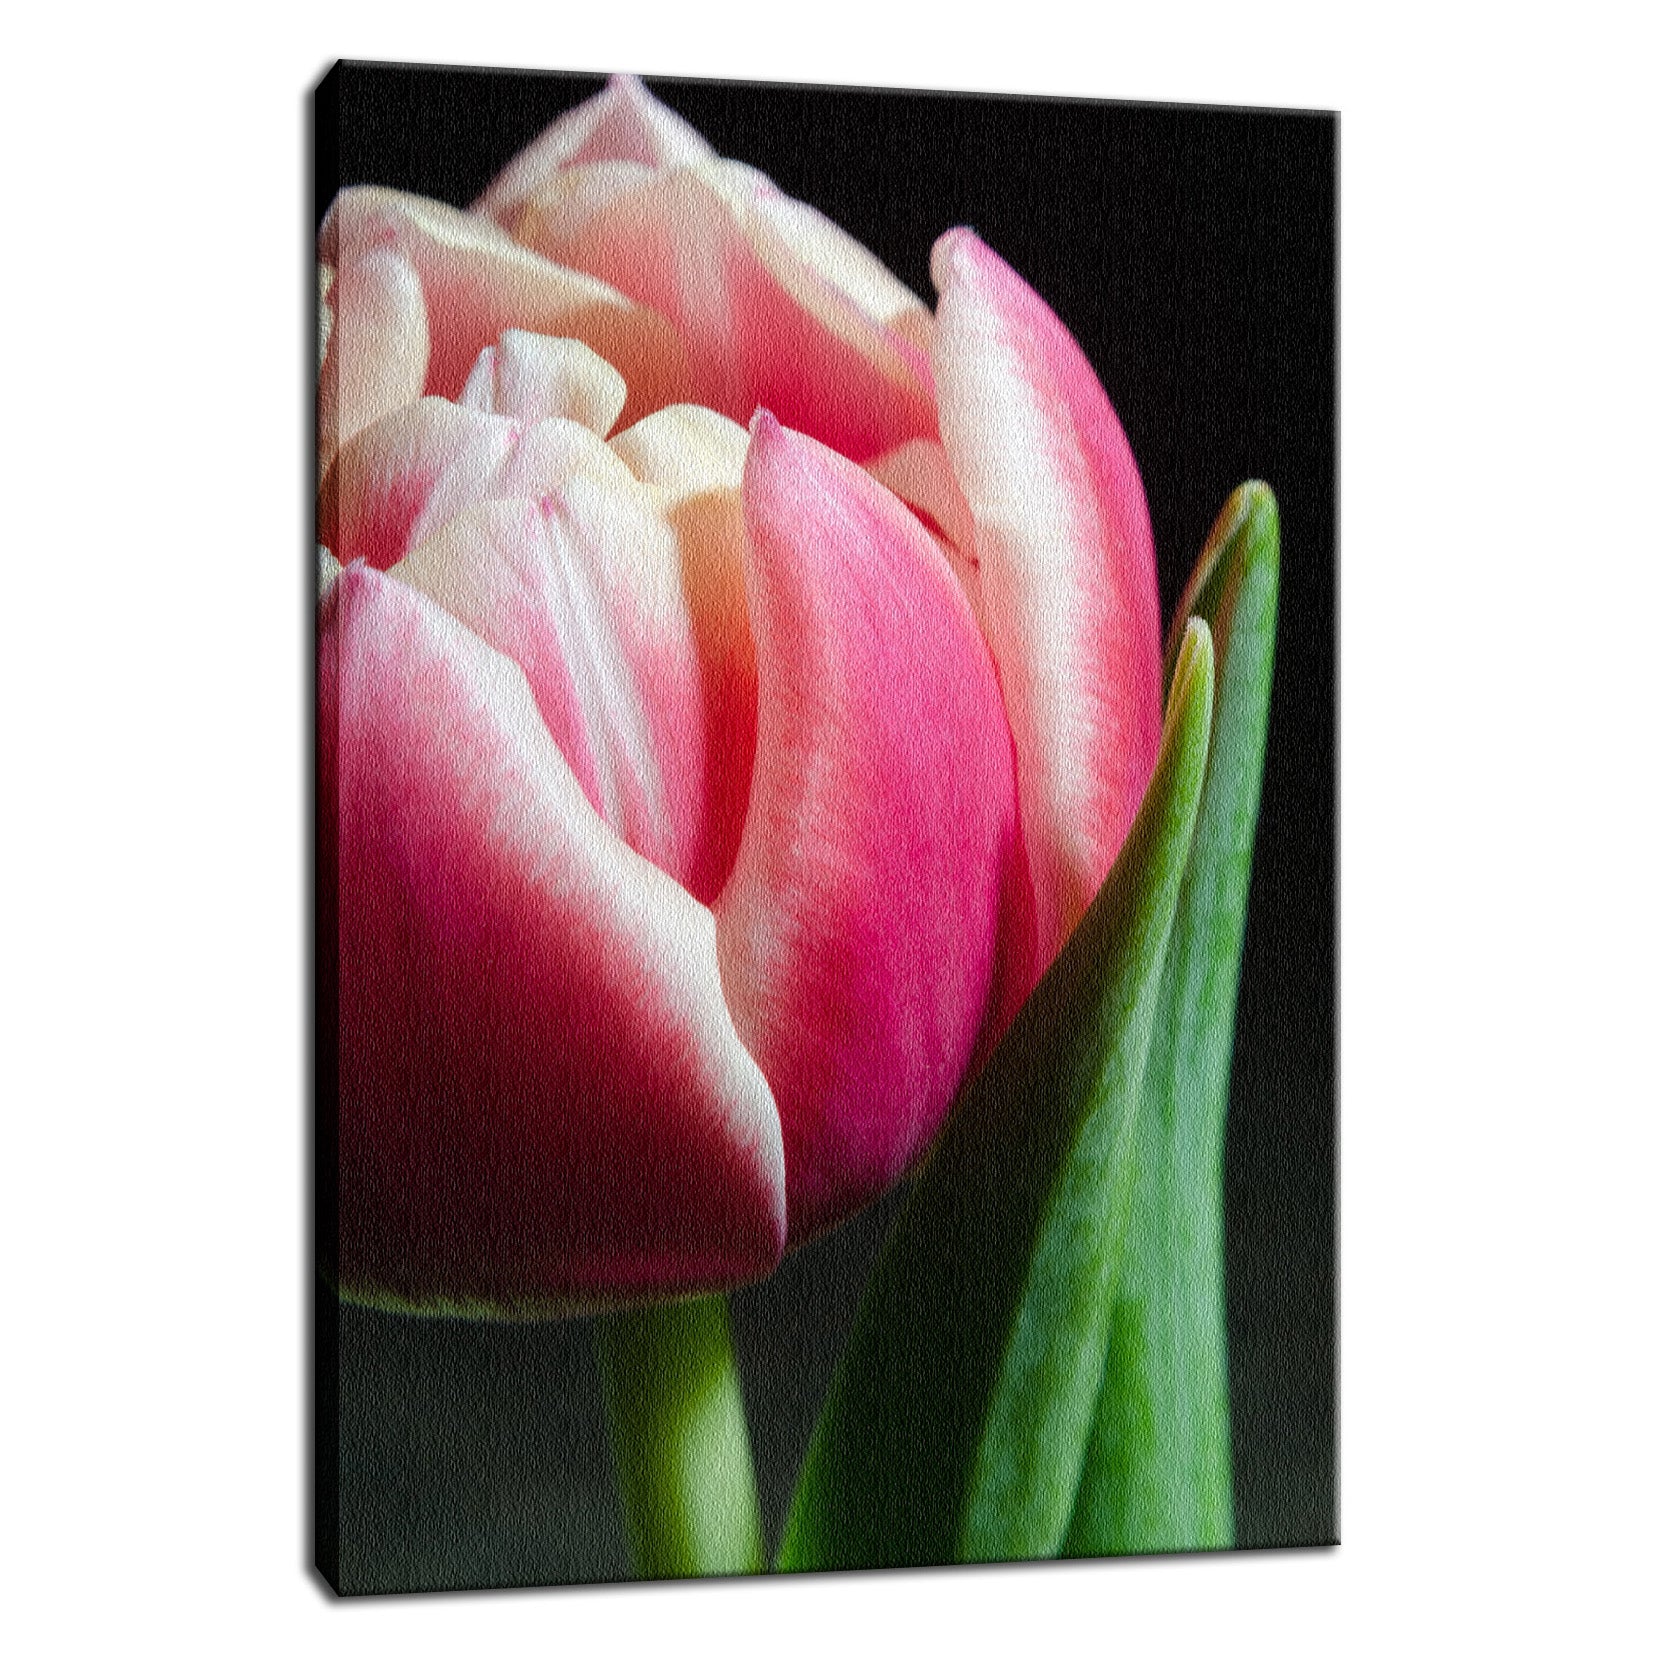 Pink and White Tulip Nature / Floral Photo Fine Art Canvas Wall Art Prints  - PIPAFINEART